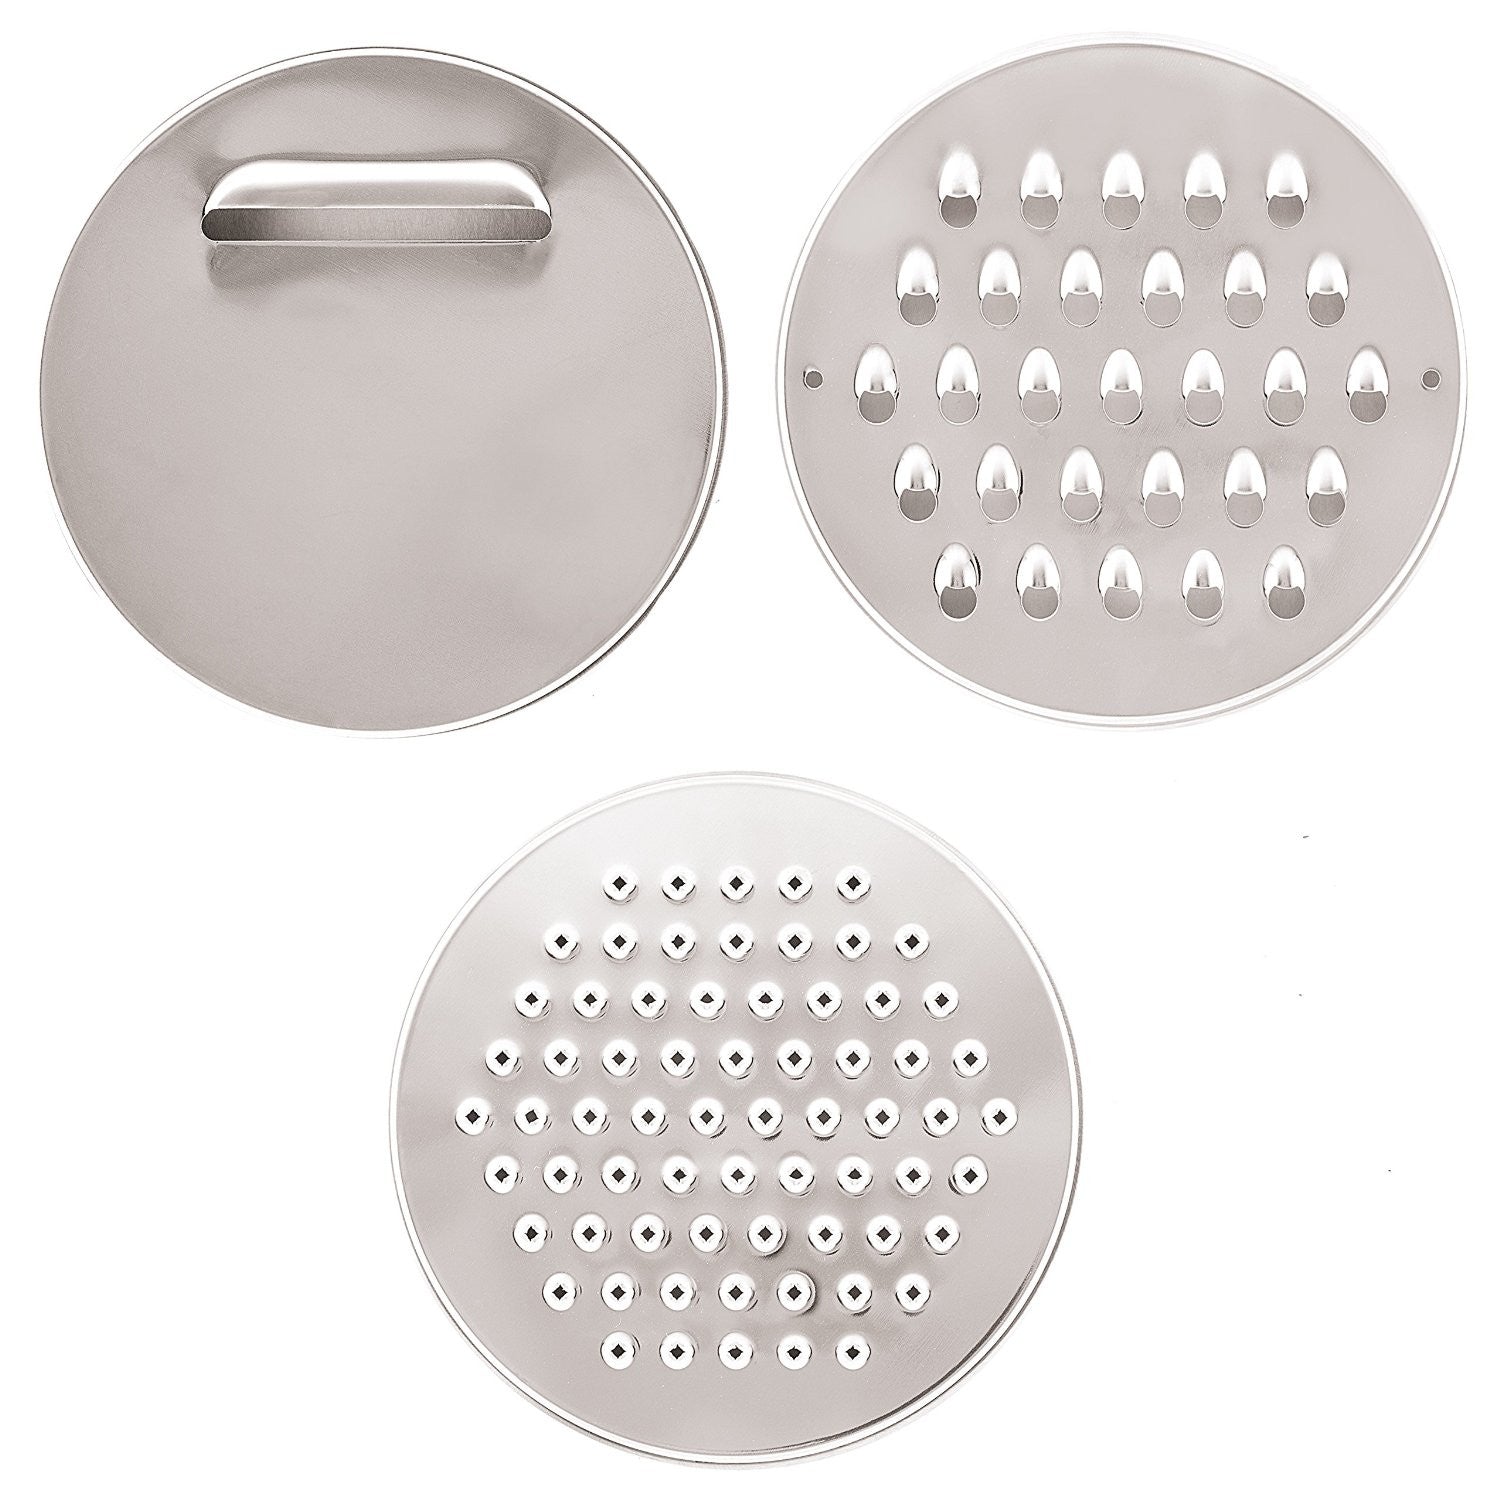 Stainless Steel Non-Slip Mixing Bowls Set with Lids and Graters, Set o –  Chef Essential